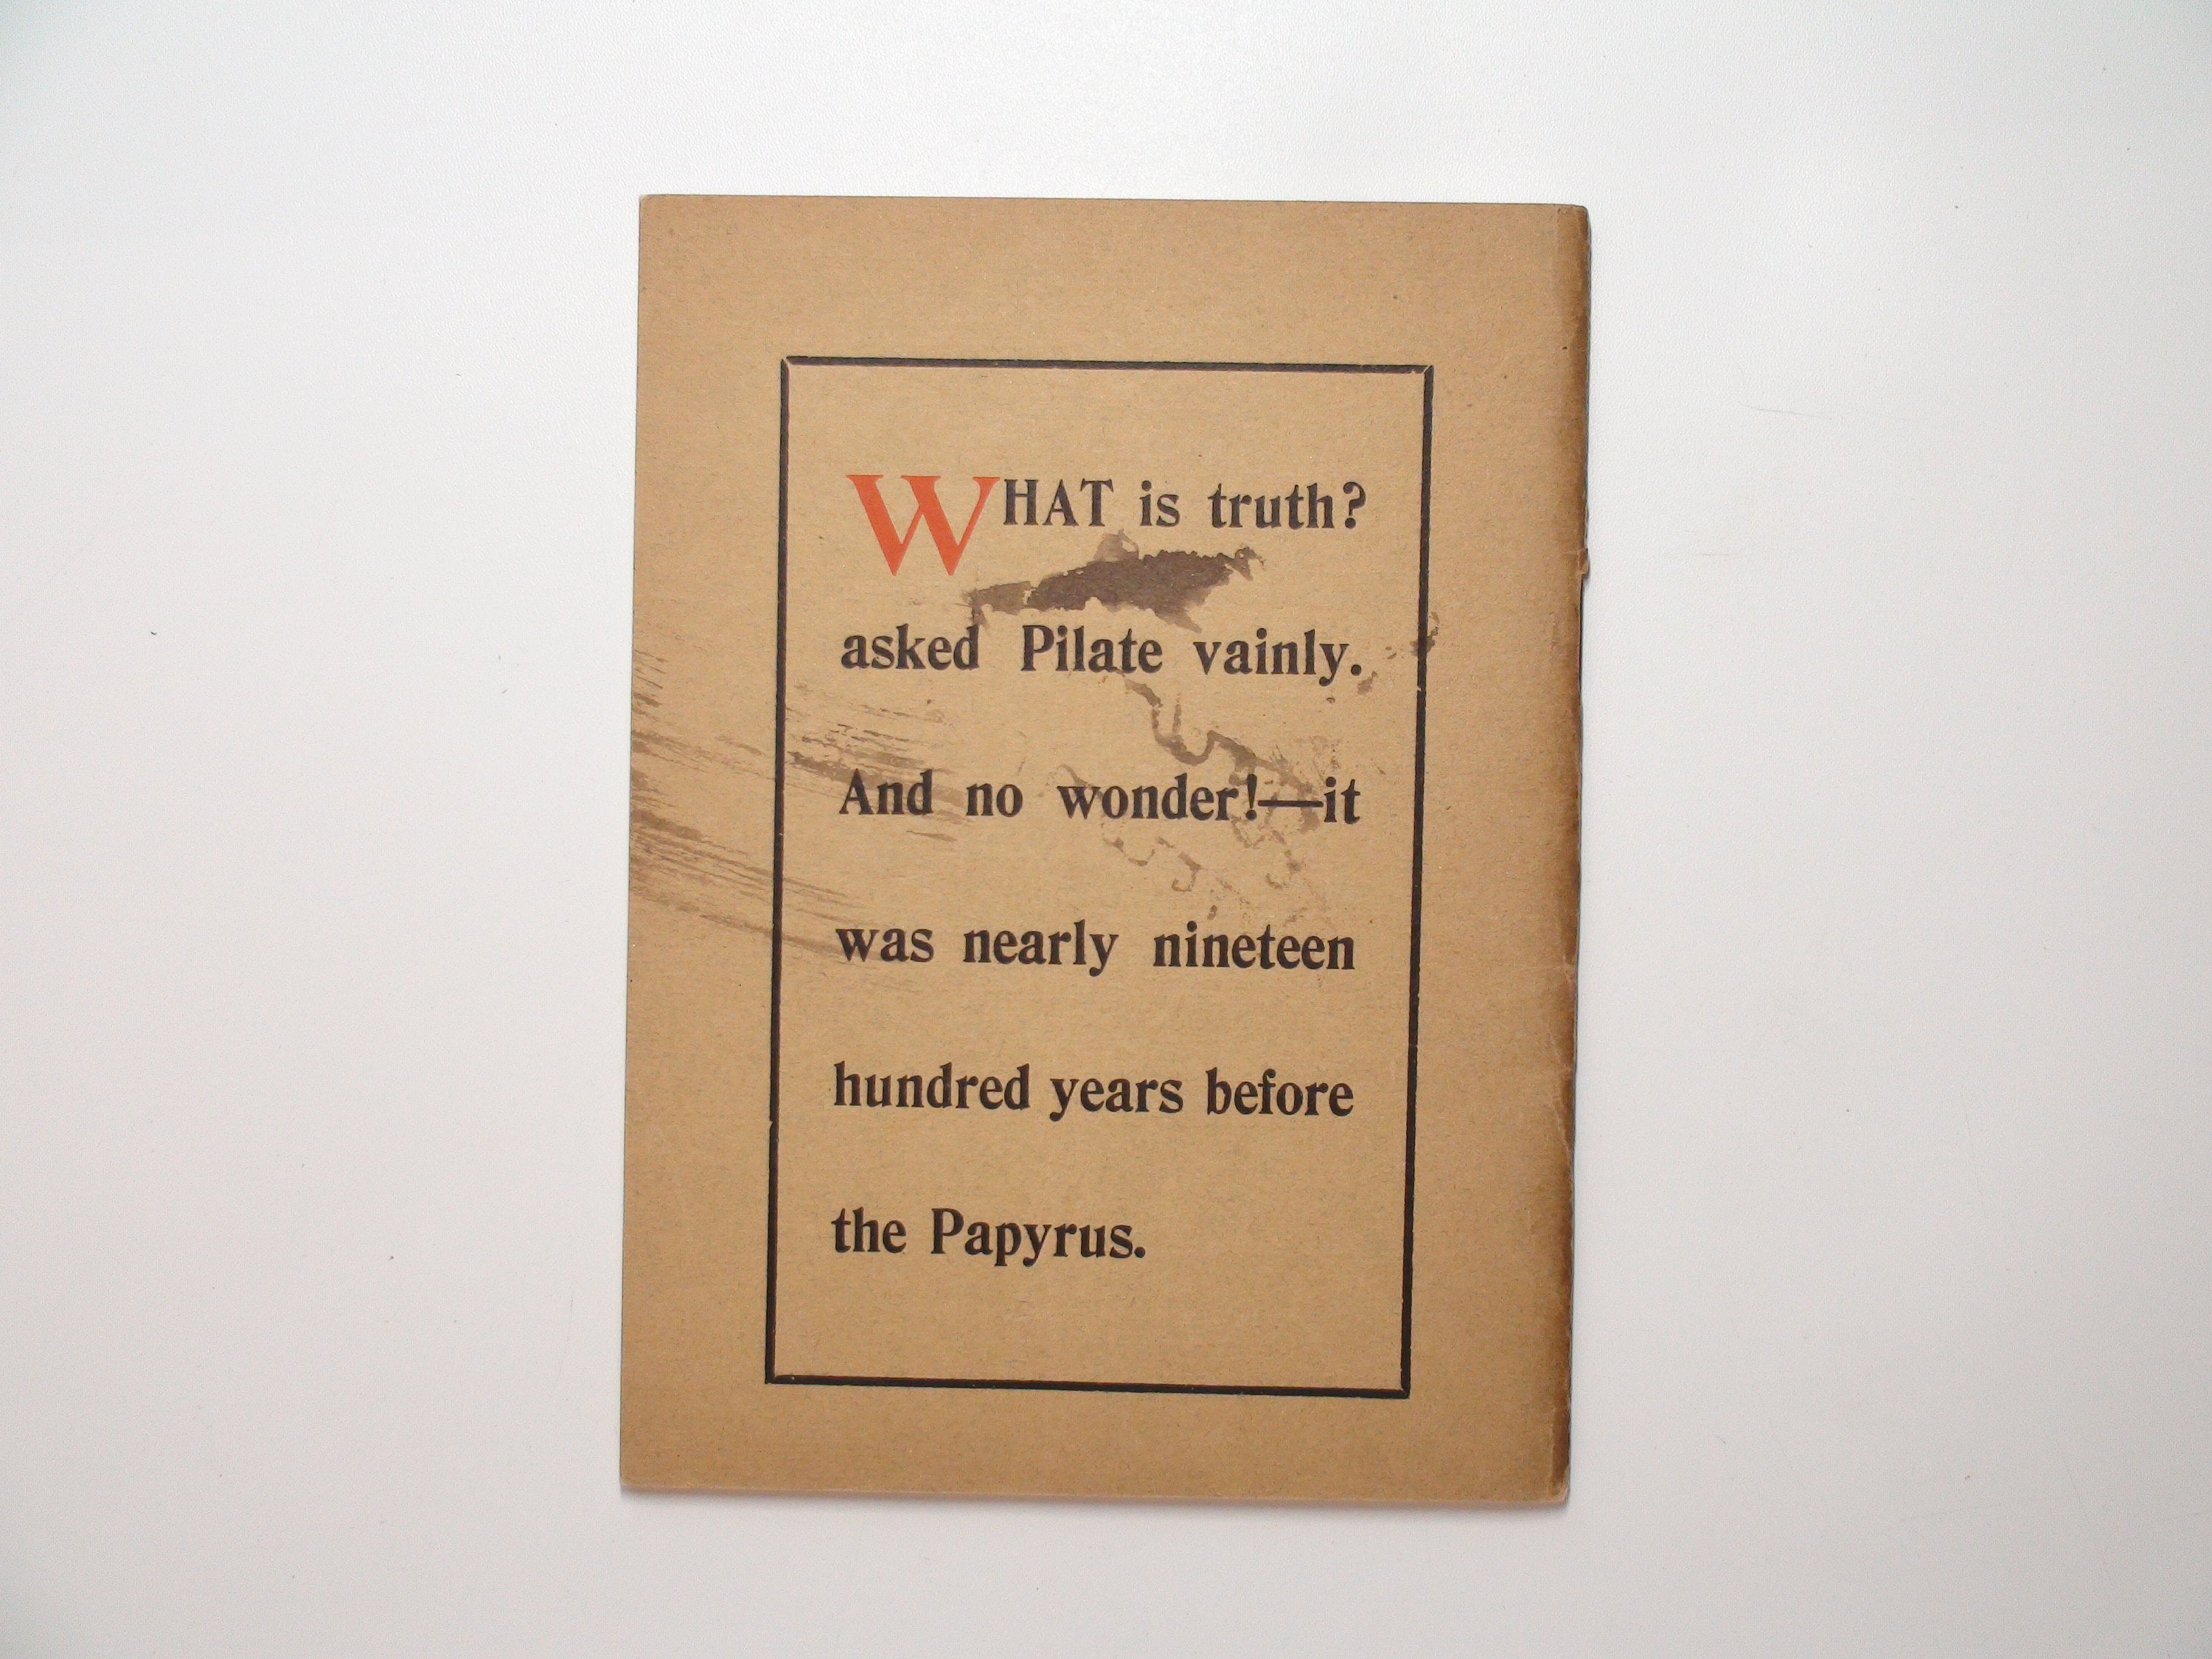 The Papyrus Magazine, Ed. by Michael Monahan, RARE, 1st Ed, December 1911